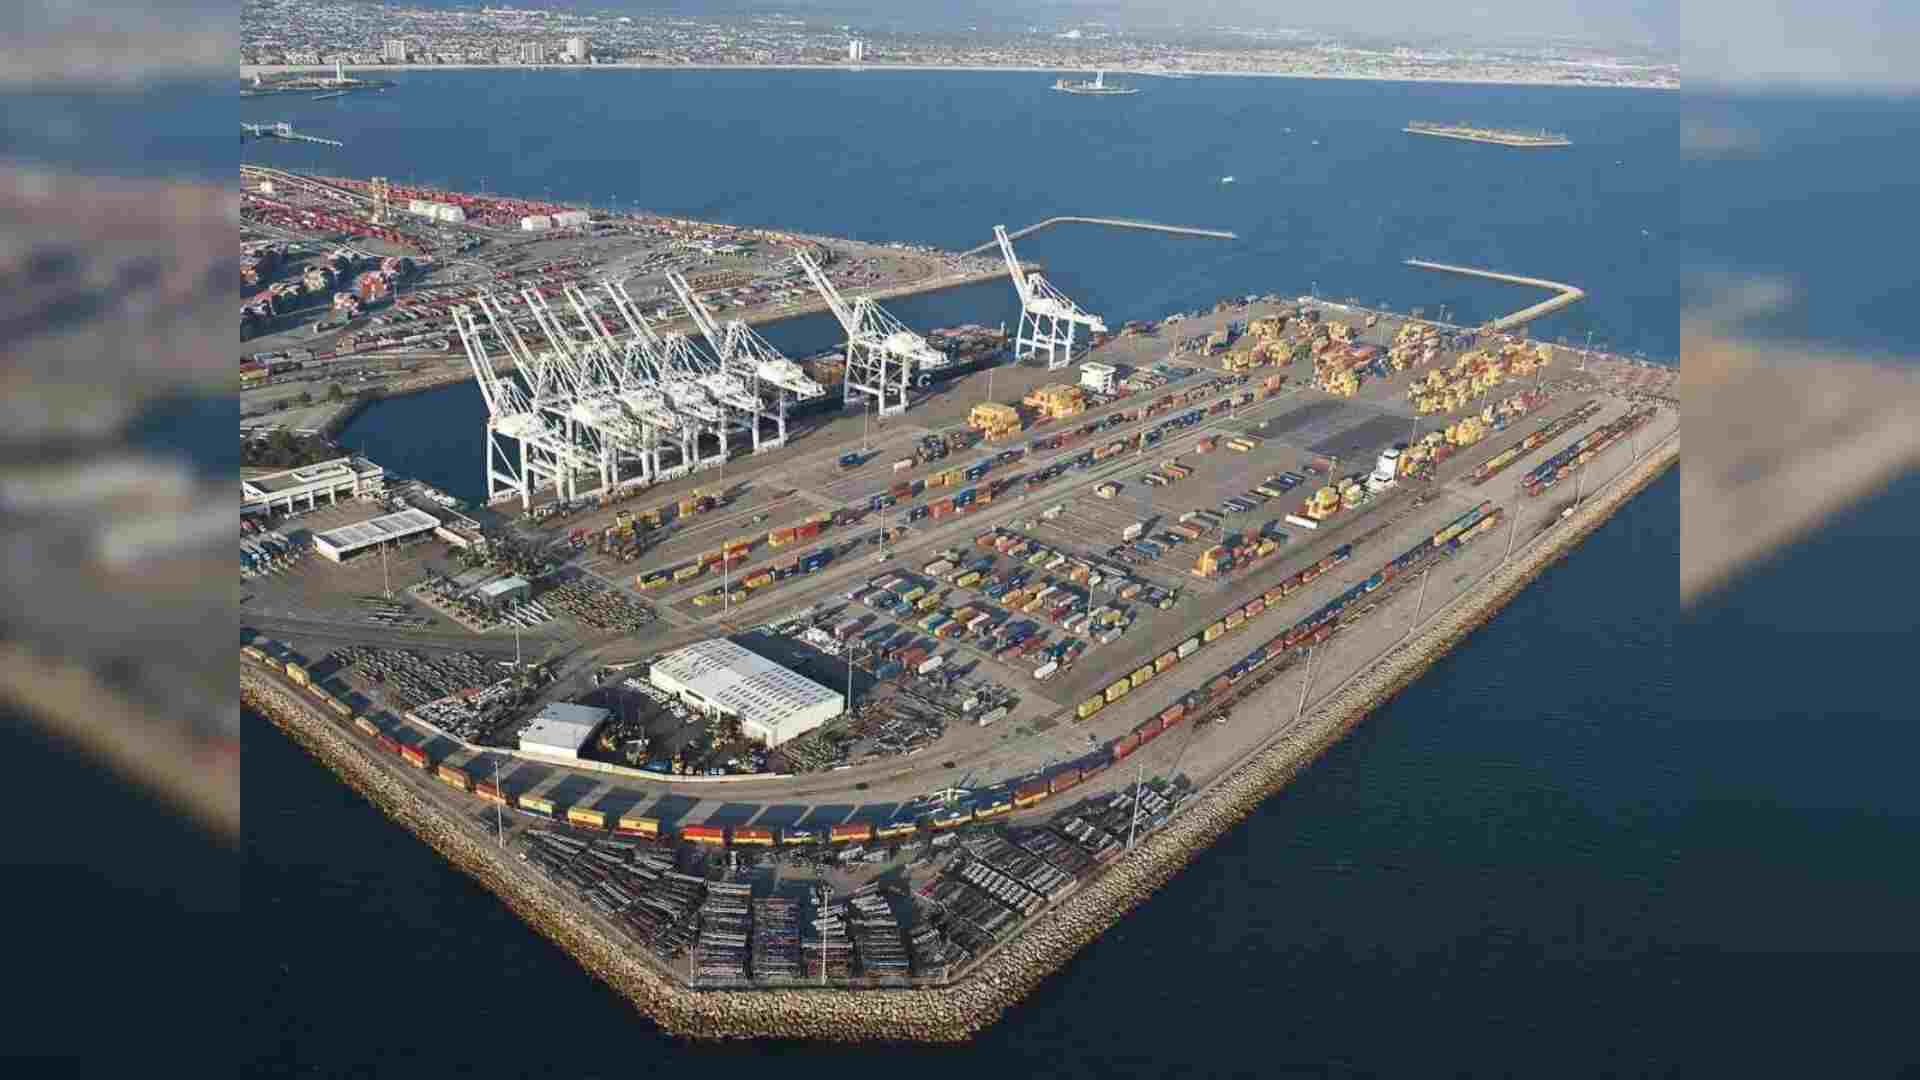 India Plans To Replicate Chabahar Port Model In Key Locations – Here’s Why